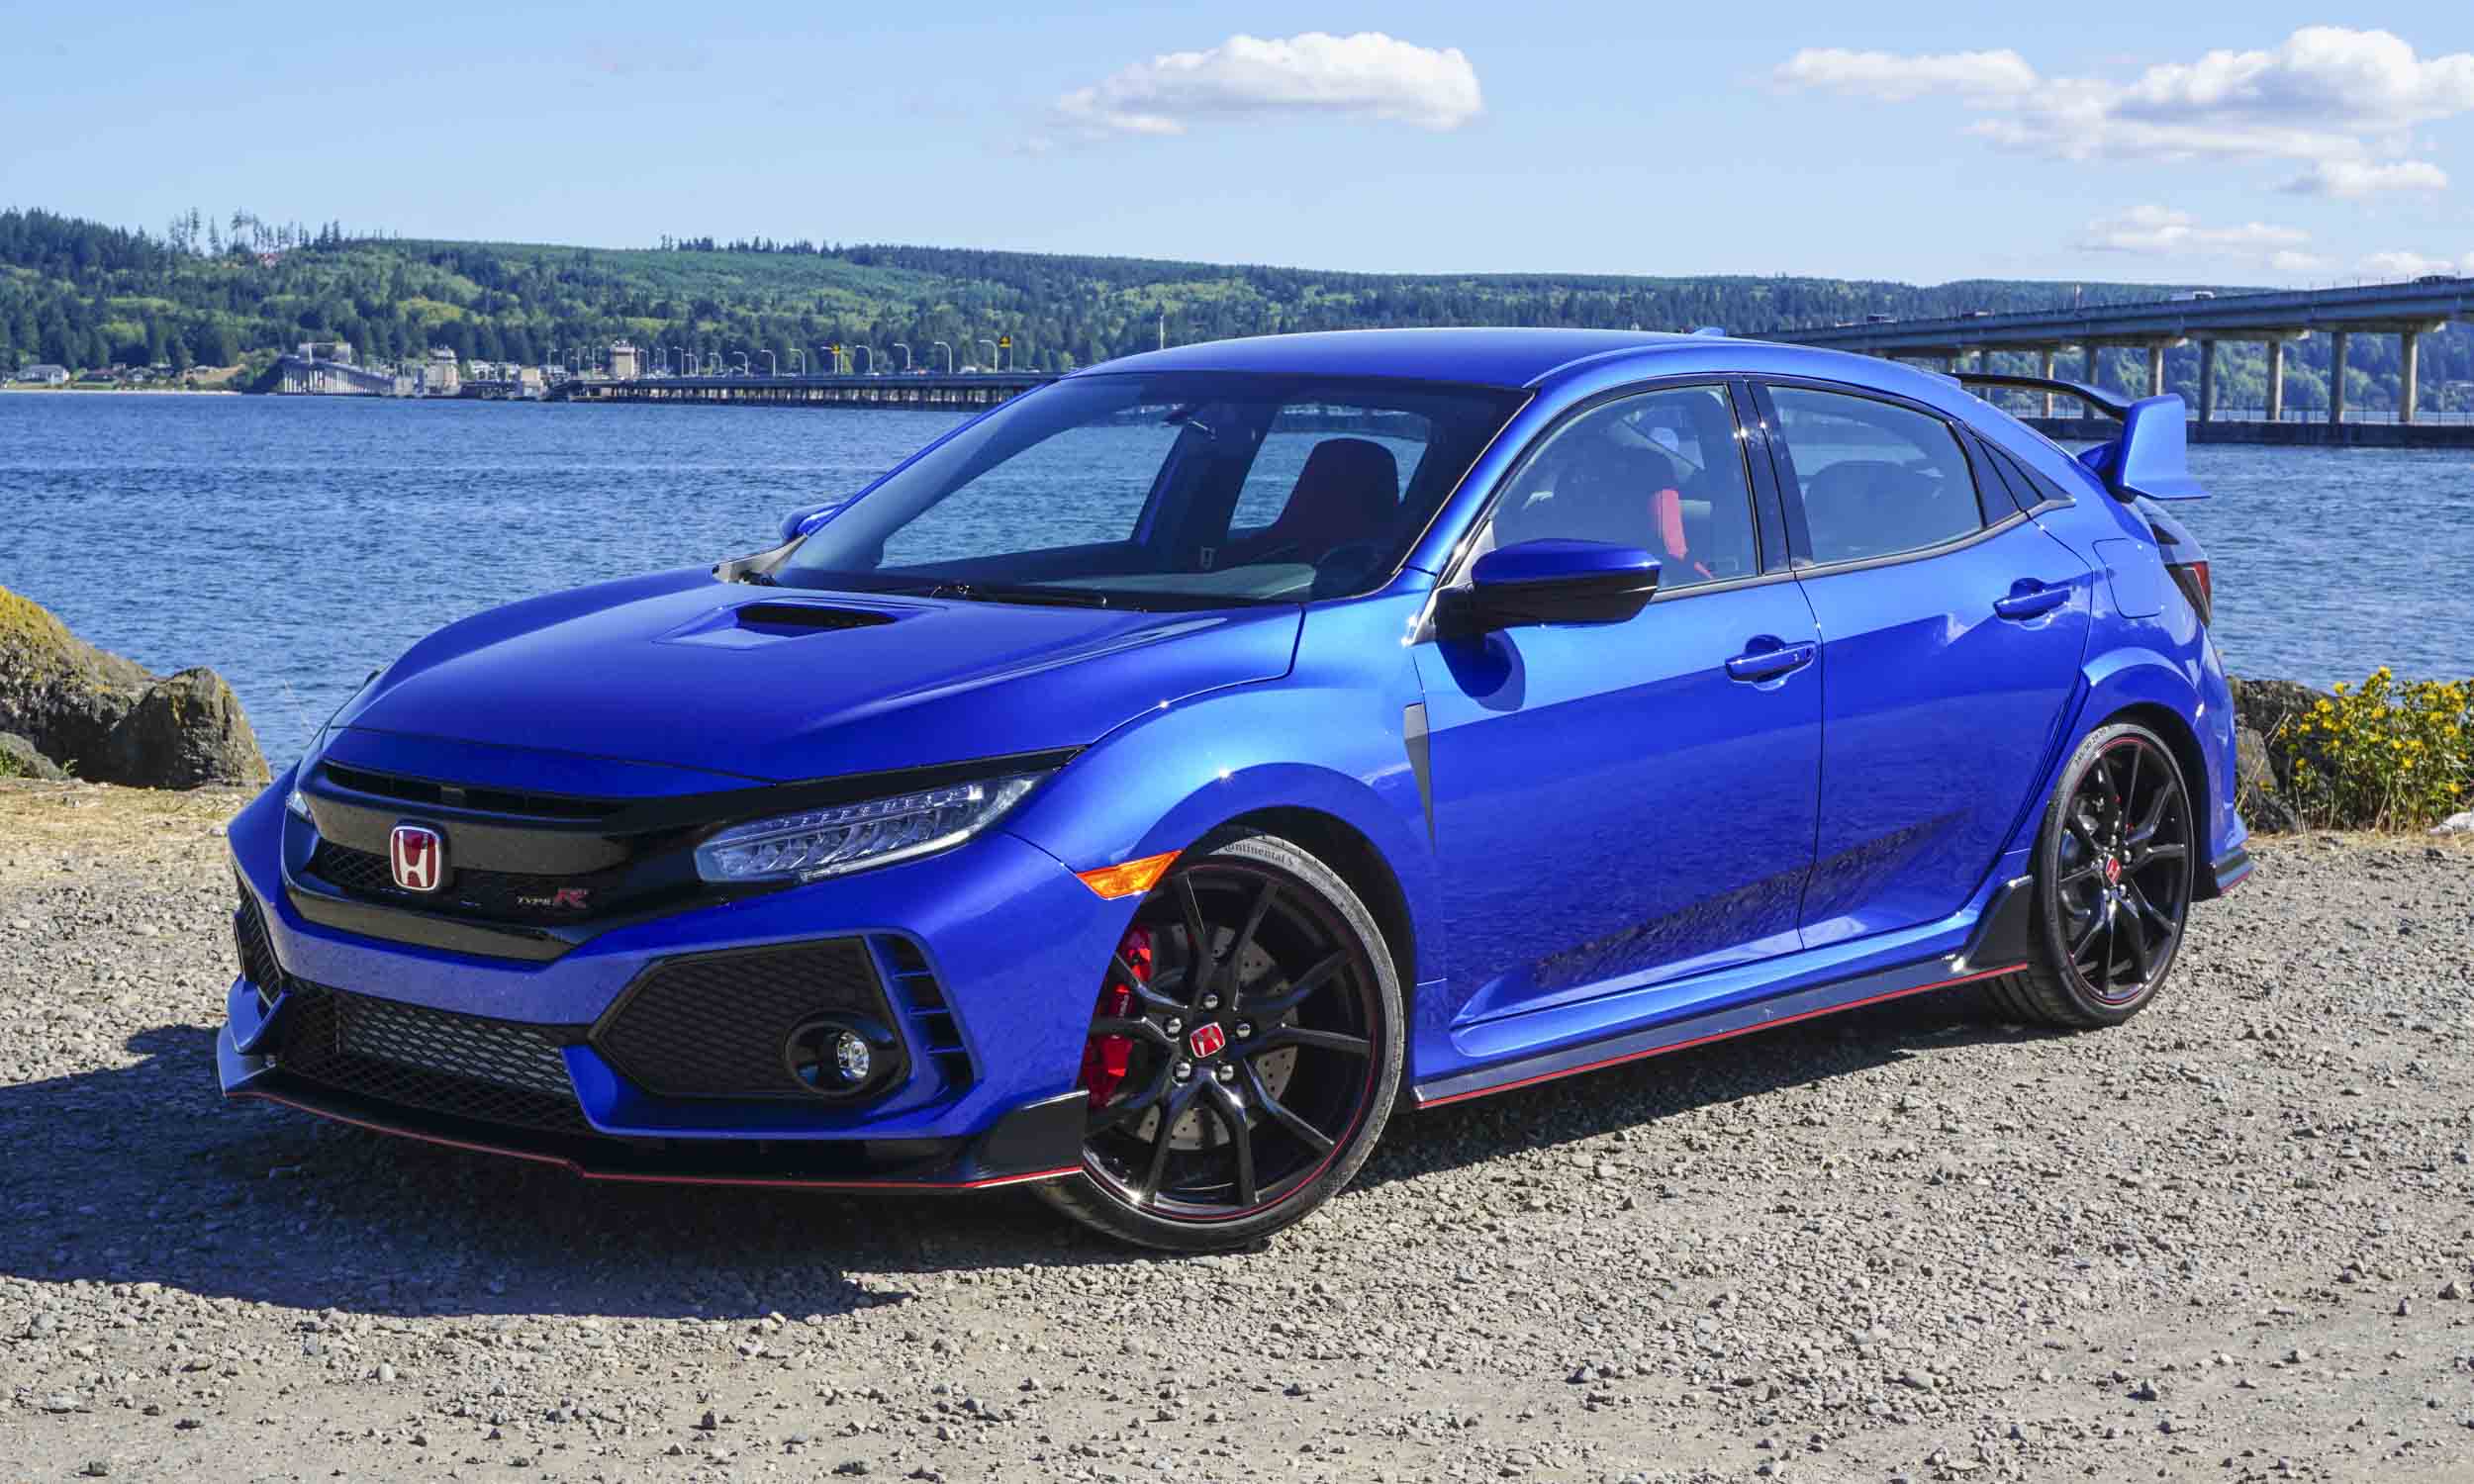 2017 Honda Civic Type R: First Drive Review